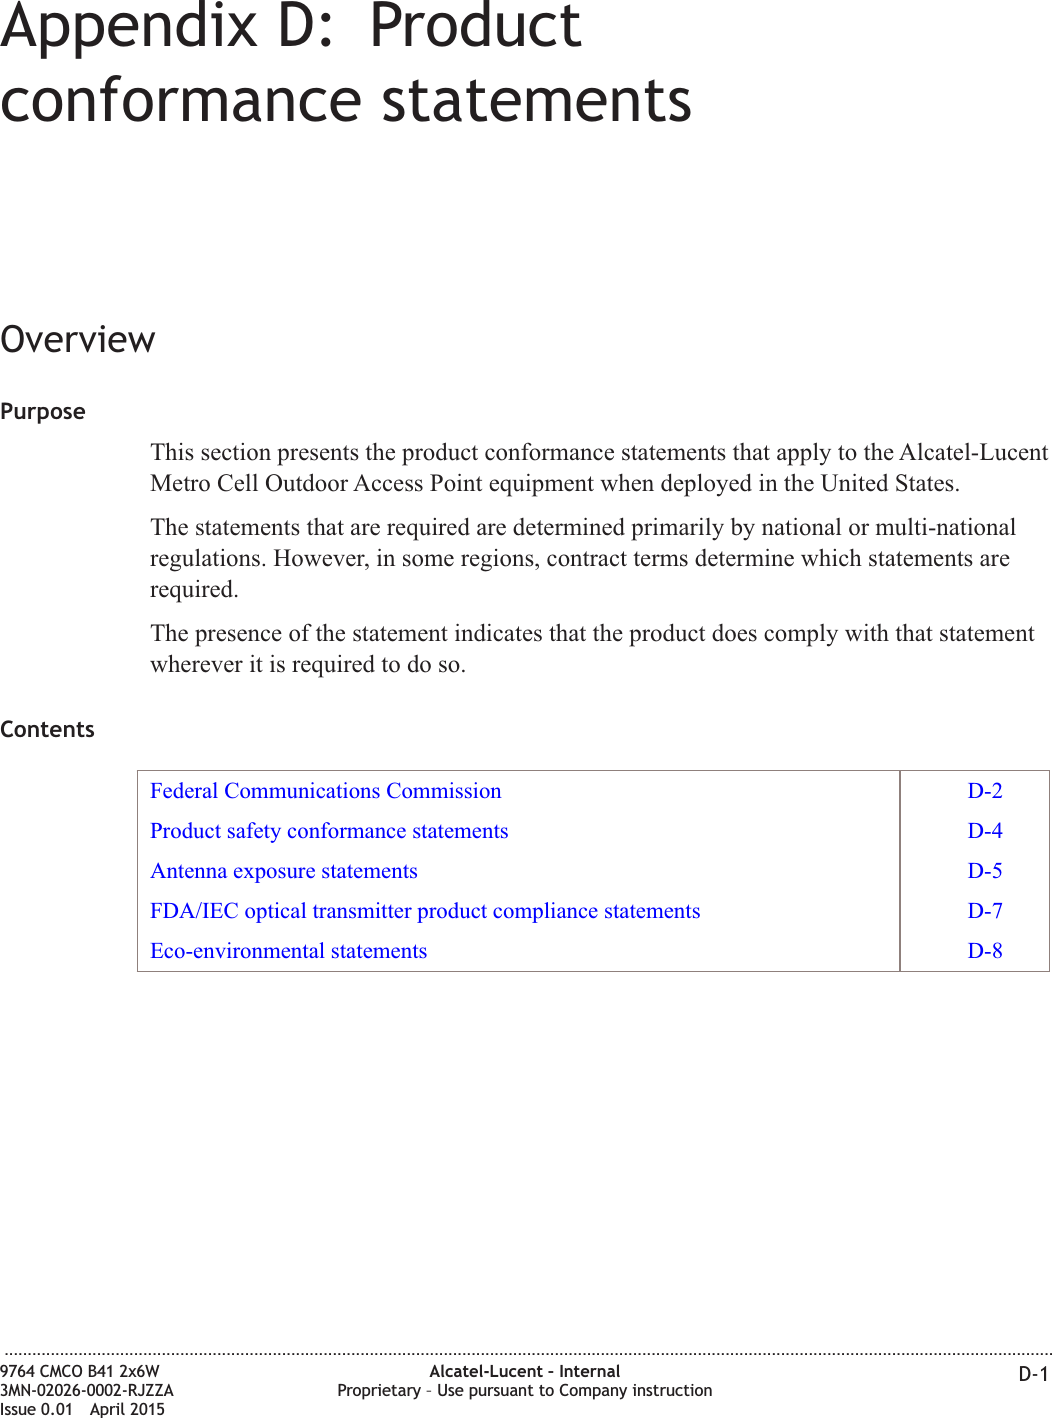 Appendix D: Productconformance statementsOverviewPurposeThis section presents the product conformance statements that apply to the Alcatel-LucentMetro Cell Outdoor Access Point equipment when deployed in the United States.The statements that are required are determined primarily by national or multi-nationalregulations. However, in some regions, contract terms determine which statements arerequired.The presence of the statement indicates that the product does comply with that statementwherever it is required to do so.ContentsFederal Communications Commission D-2Product safety conformance statements D-4Antenna exposure statements D-5FDA/IEC optical transmitter product compliance statements D-7Eco-environmental statements D-8...................................................................................................................................................................................................................................9764 CMCO B41 2x6W3MN-02026-0002-RJZZAIssue 0.01 April 2015Alcatel-Lucent – InternalProprietary – Use pursuant to Company instruction D-1PRELIMINARYPRELIMINARY